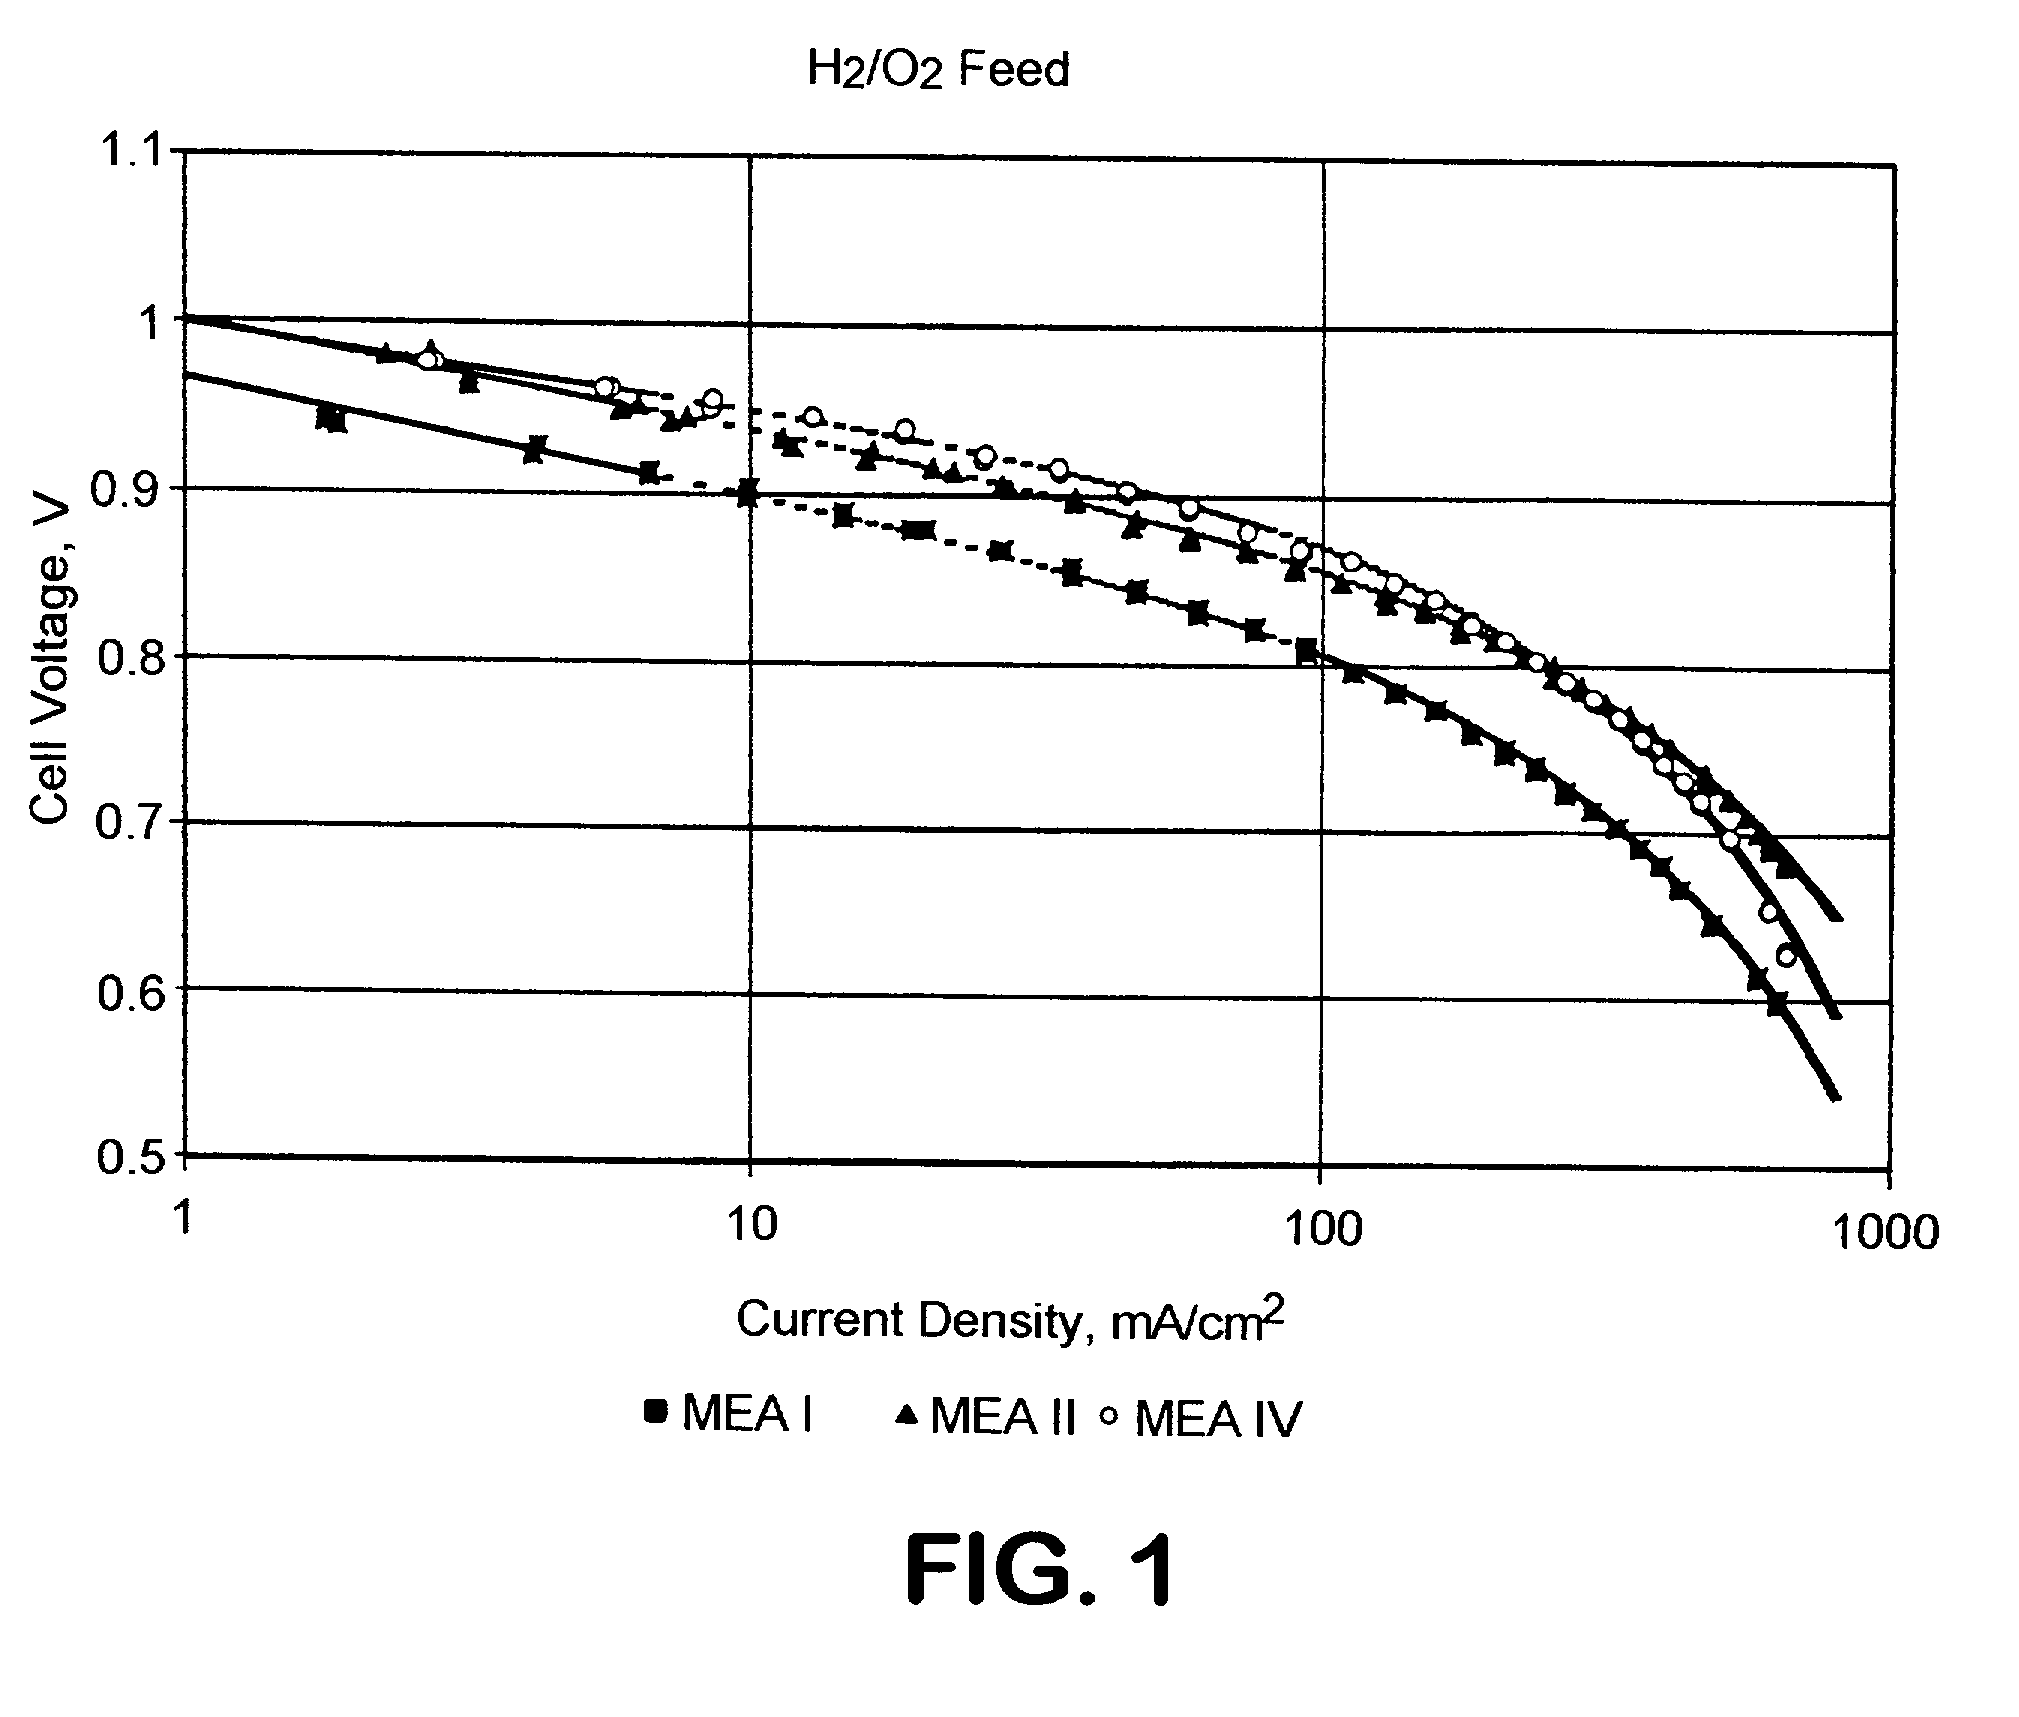 Fuel cells and other products containing modified carbon products